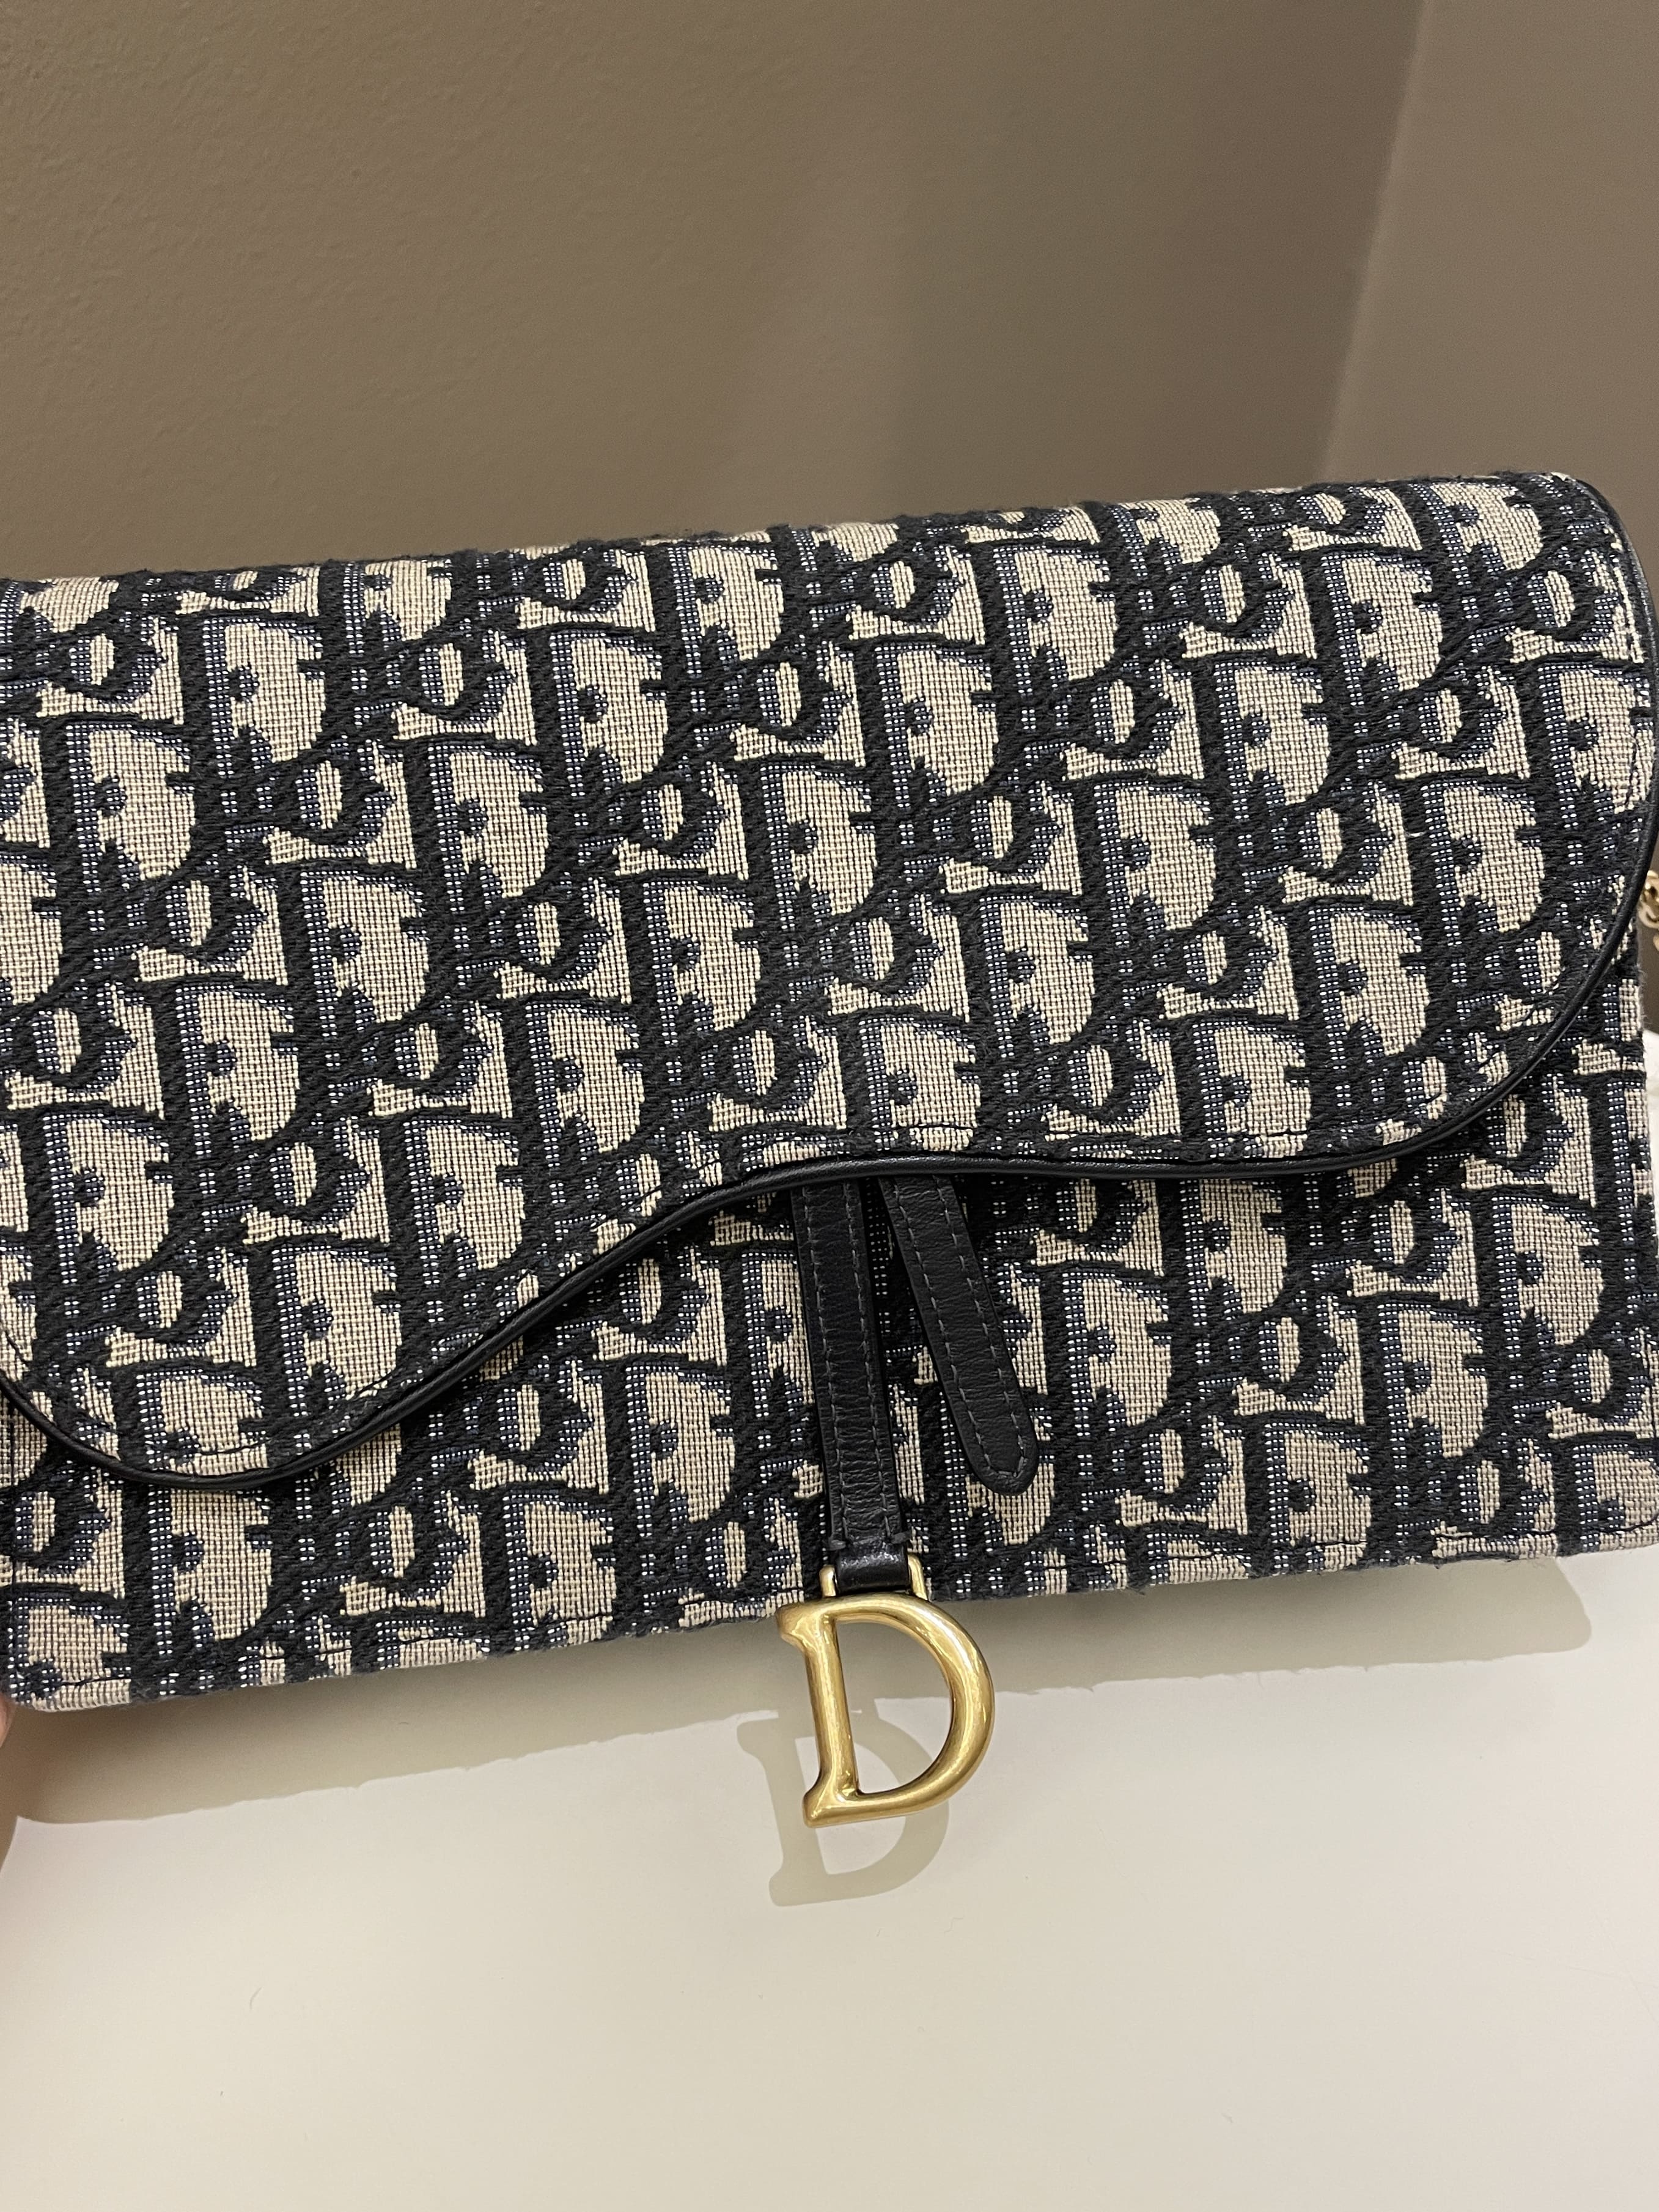 Christian Dior Saddle Pouch with Chain, Blue